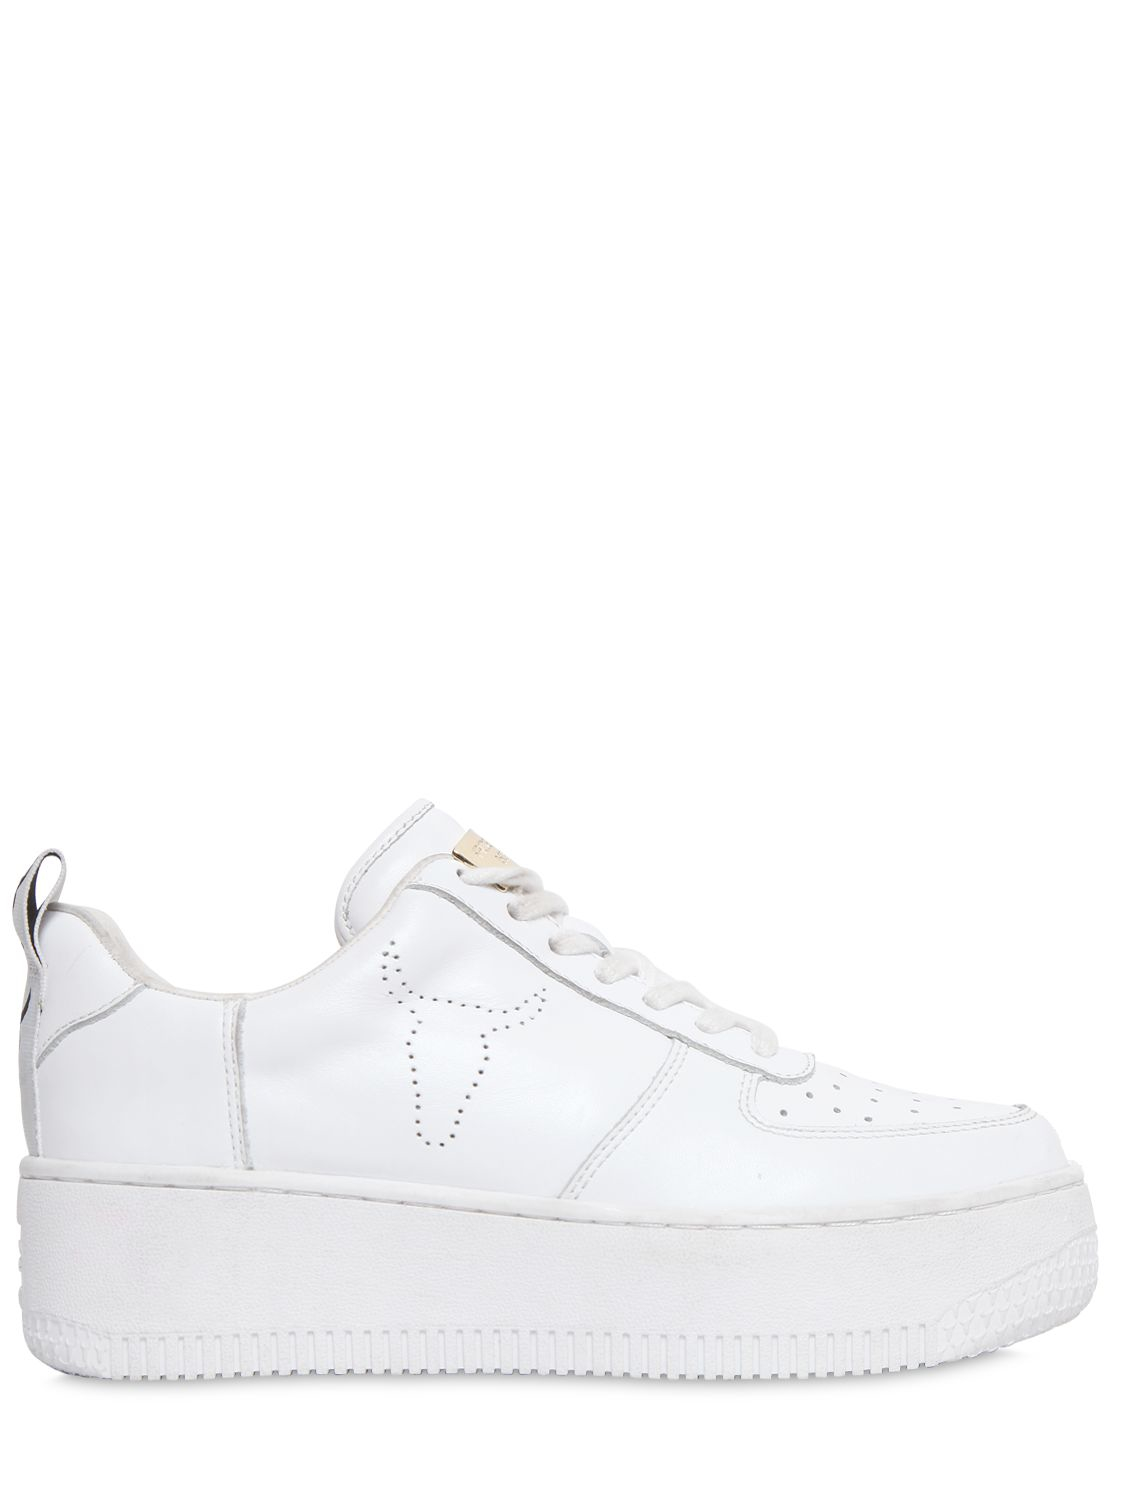 Windsor smith 50mm Racer Leather Sneakers in White | Lyst